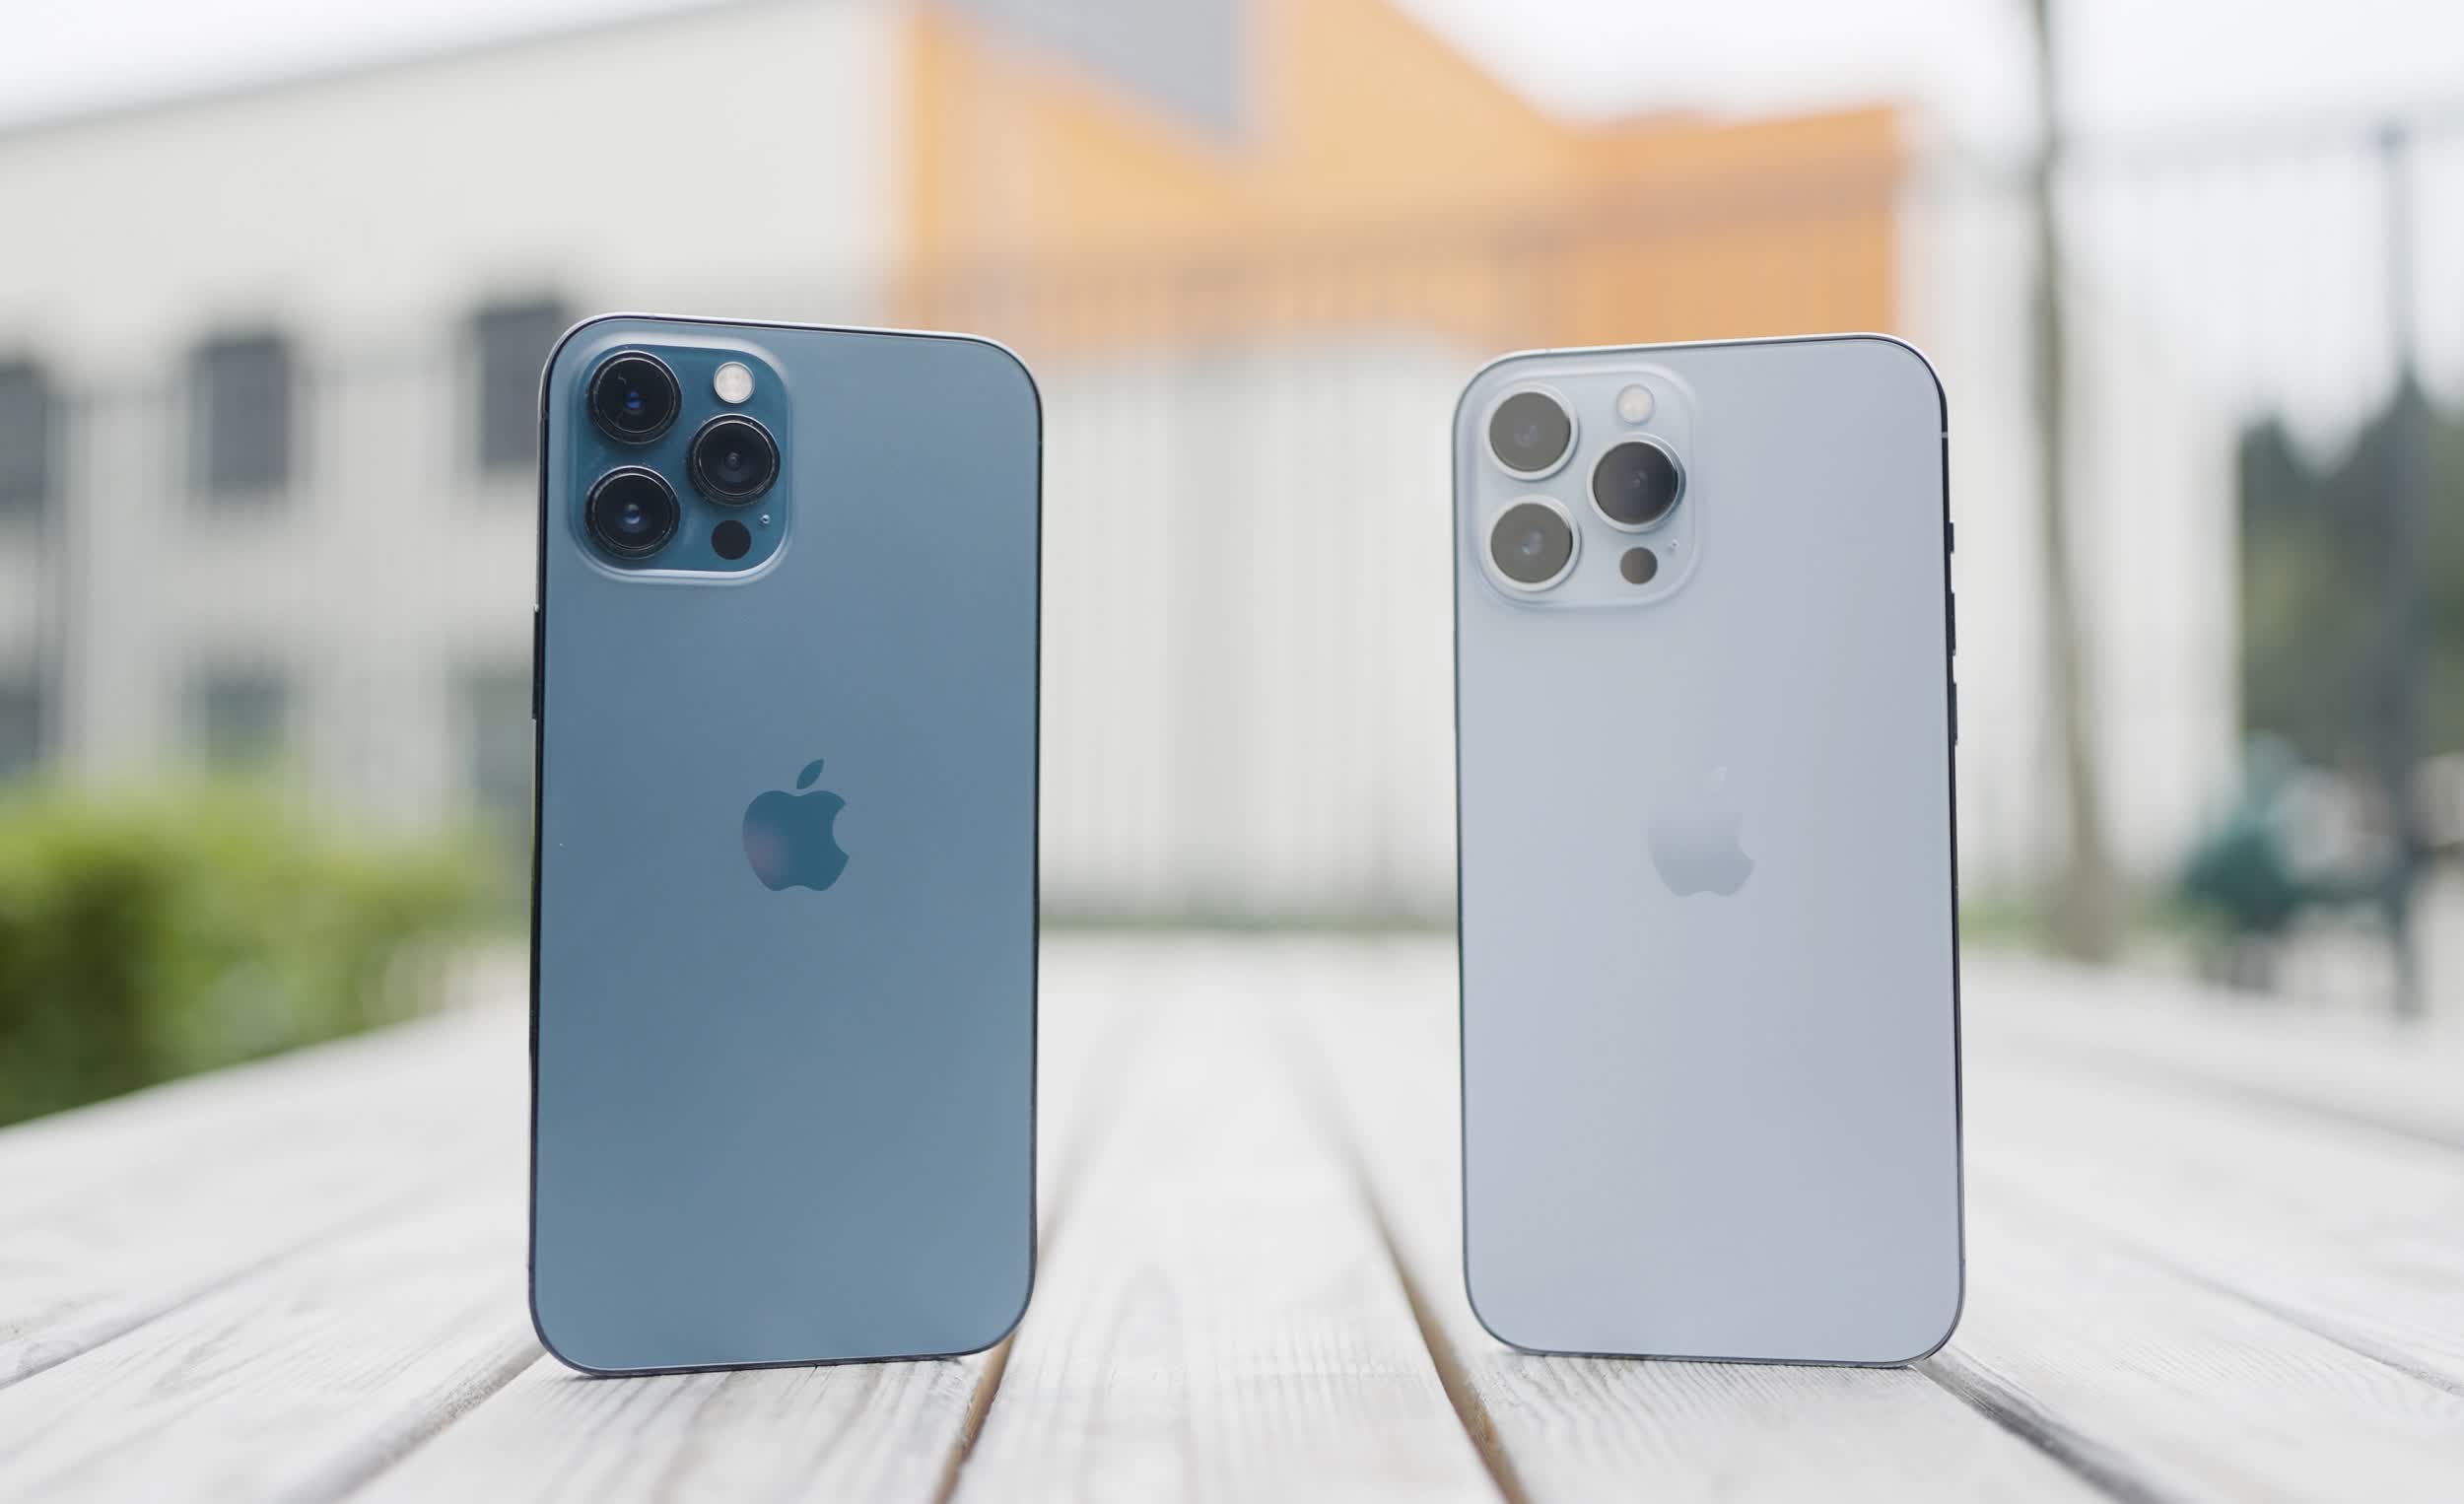 Apple was responsible for 22 percent of global smartphone shipments in Q4 2021